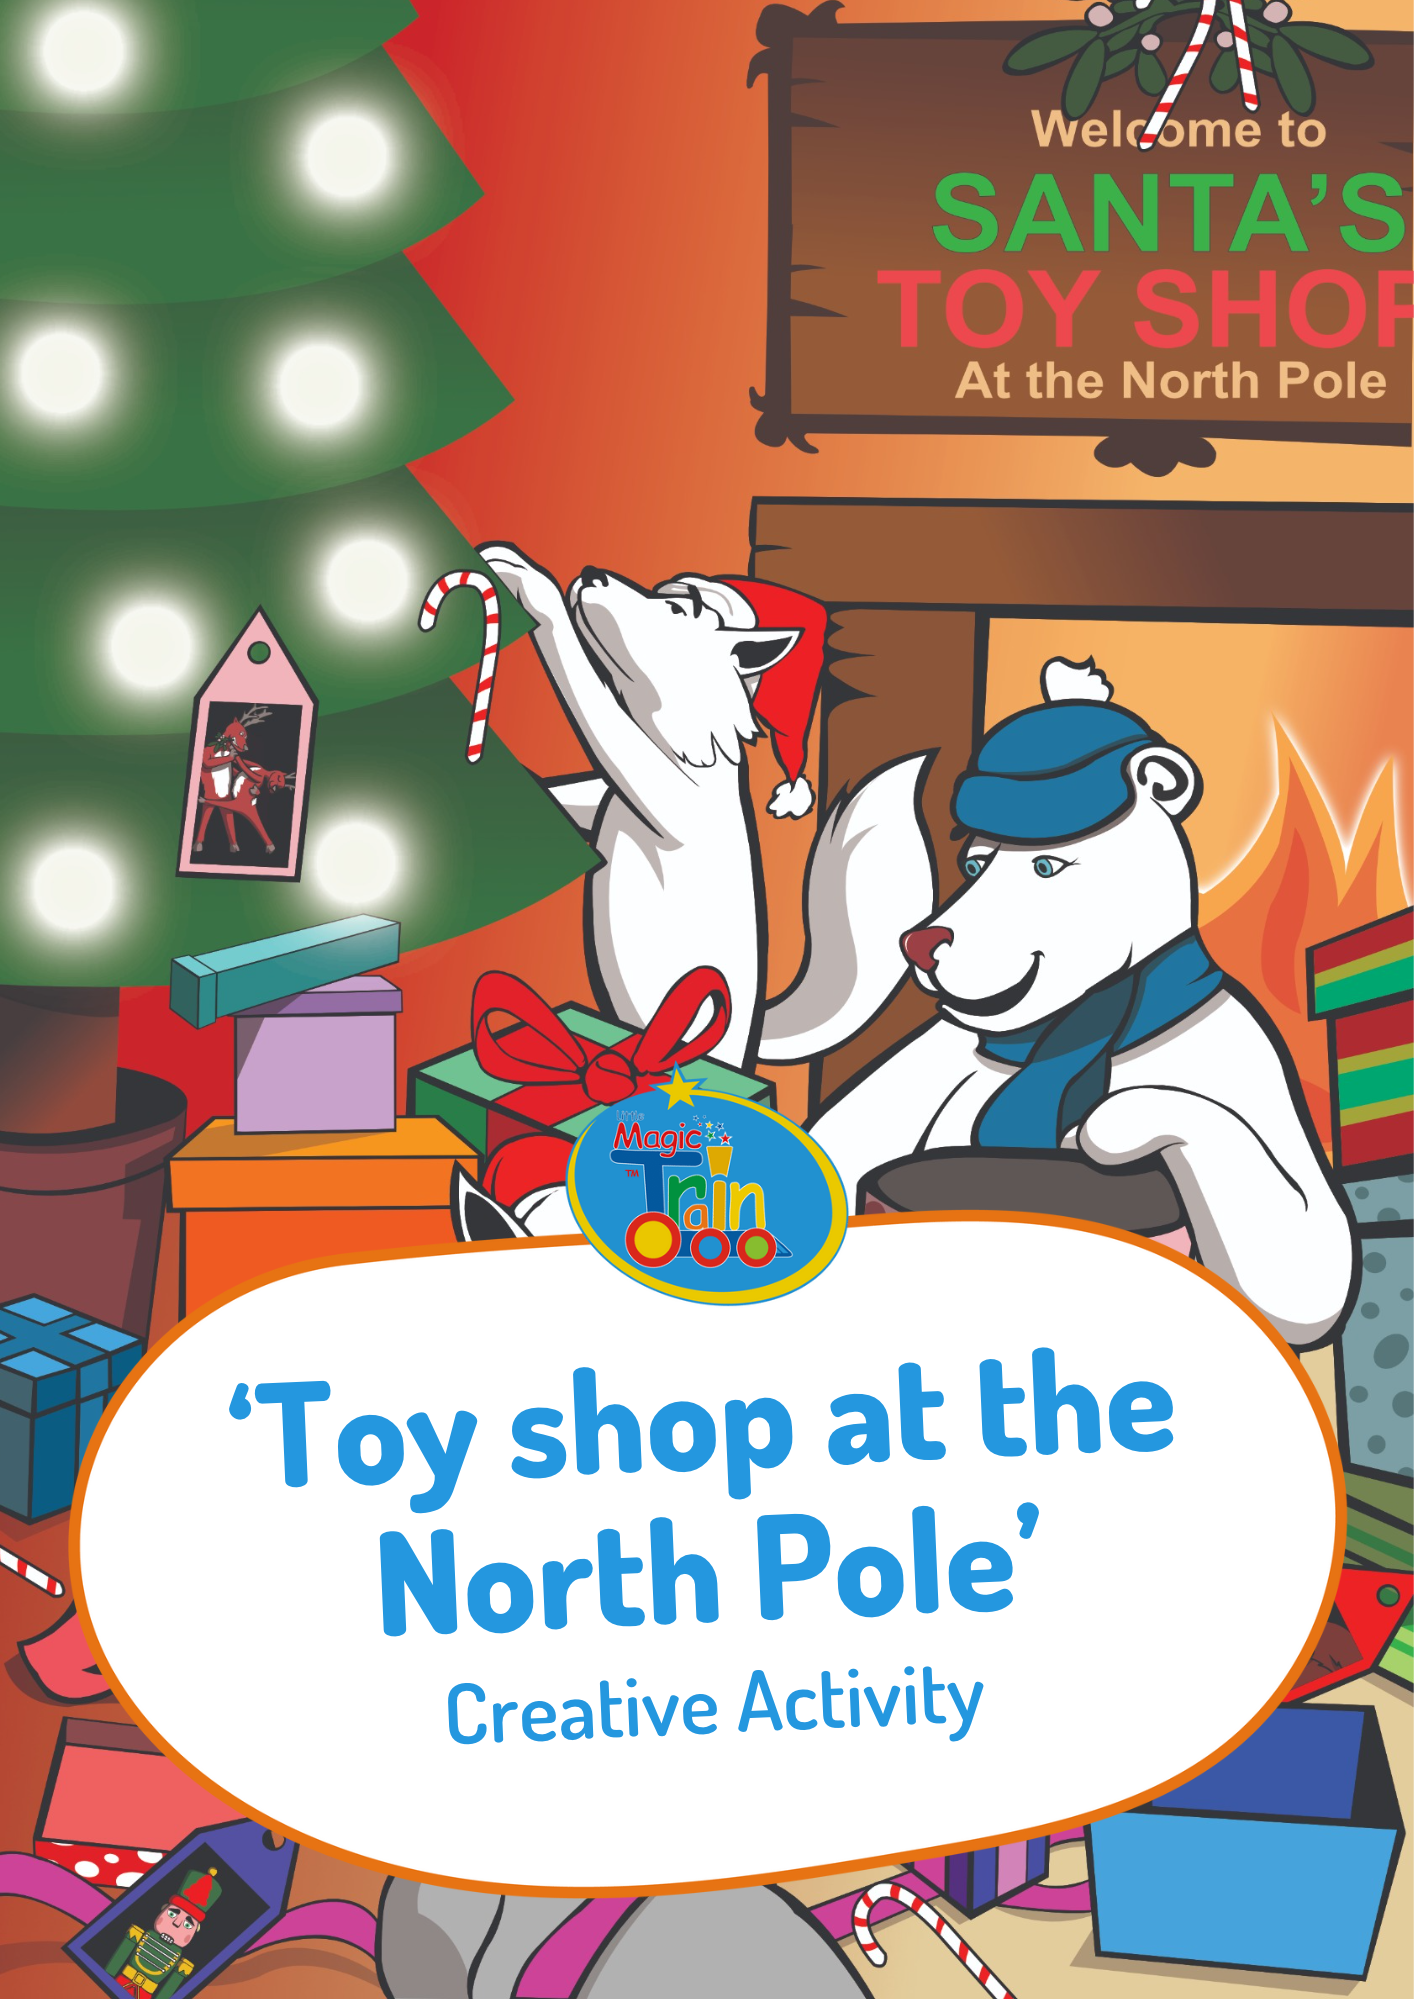 shop image Creative-toy-shop-at-the-north-pole